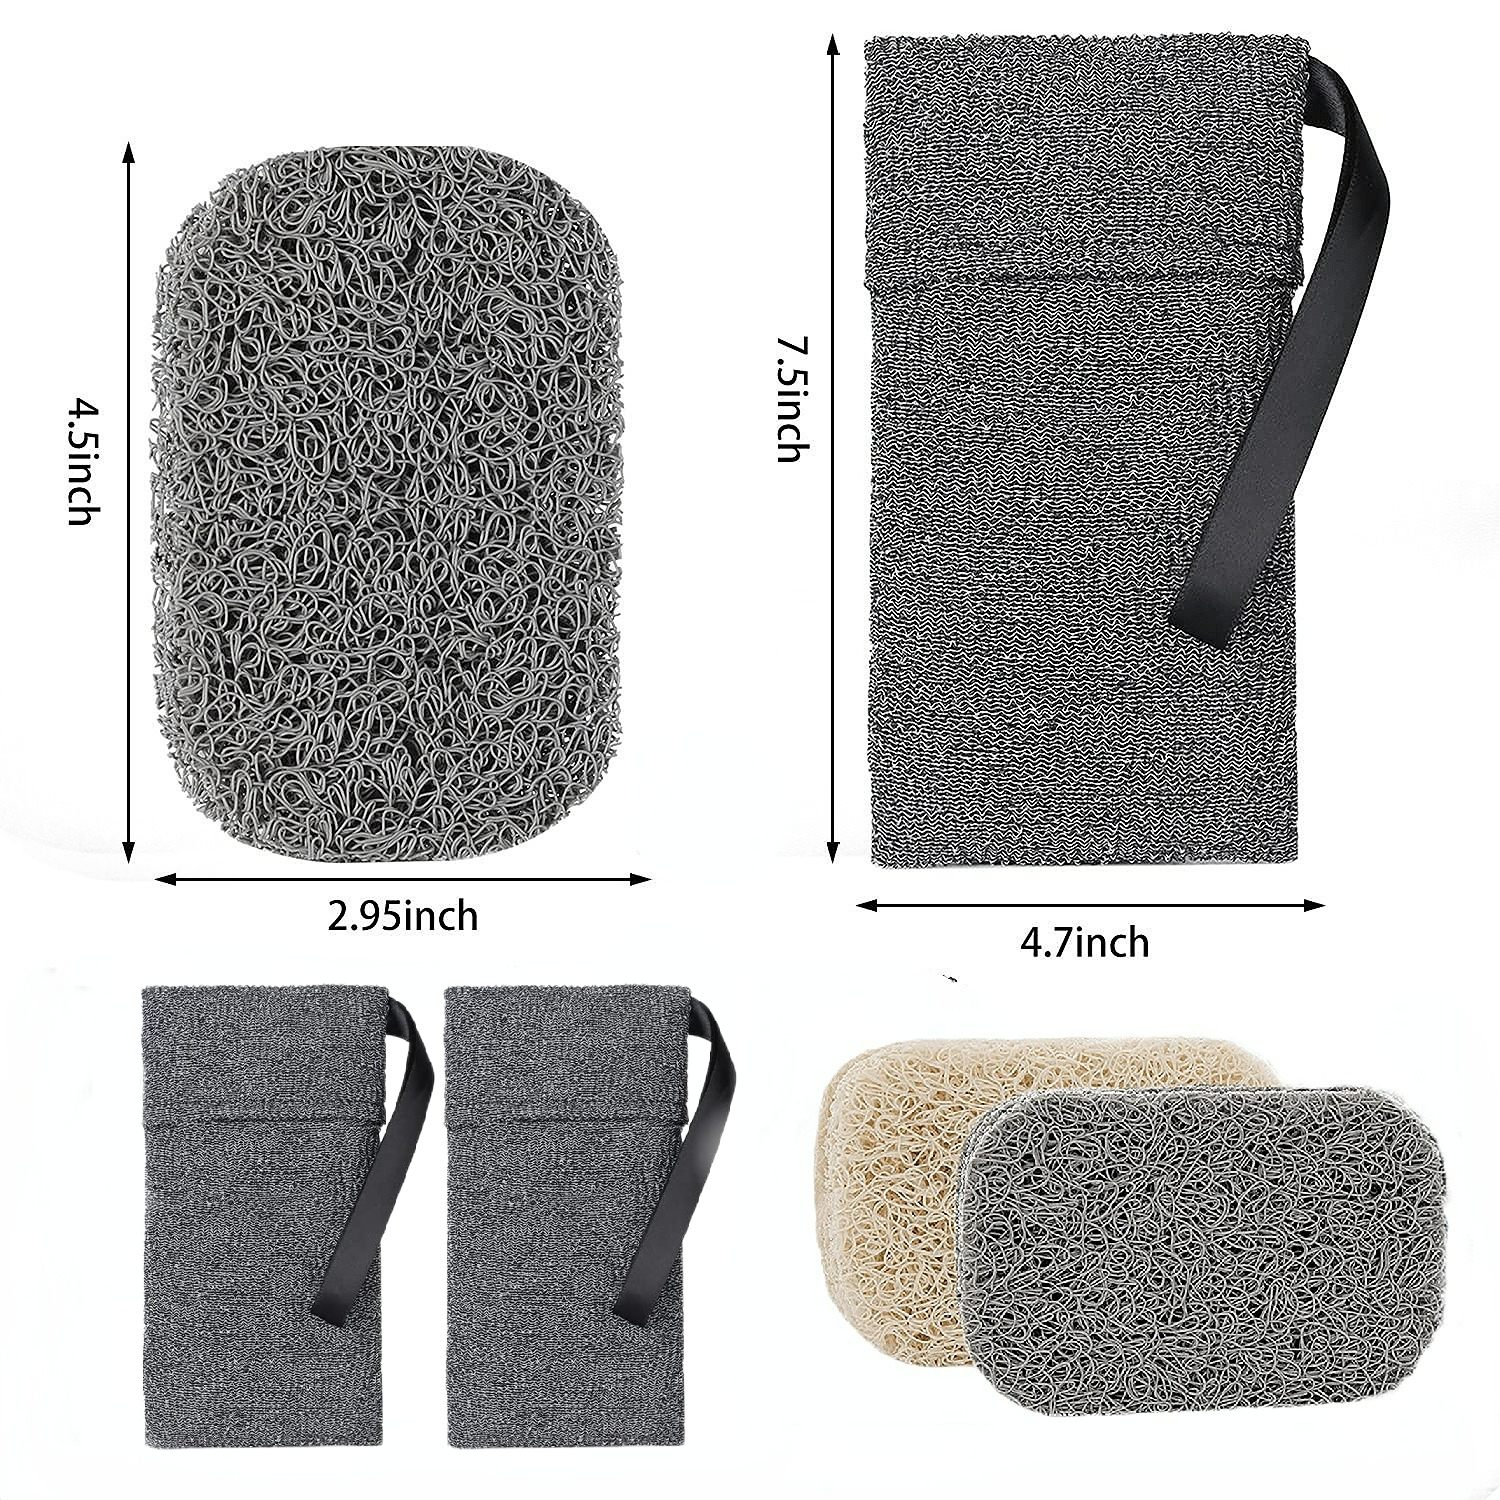 6-Pack Soap Pocket Exfoliating Soap Saver Pouch, Body Scrubber Rough Sponge  Exfoliator for Bath or Shower, Gray Mesh Bar Soap Foam Lather Pouch